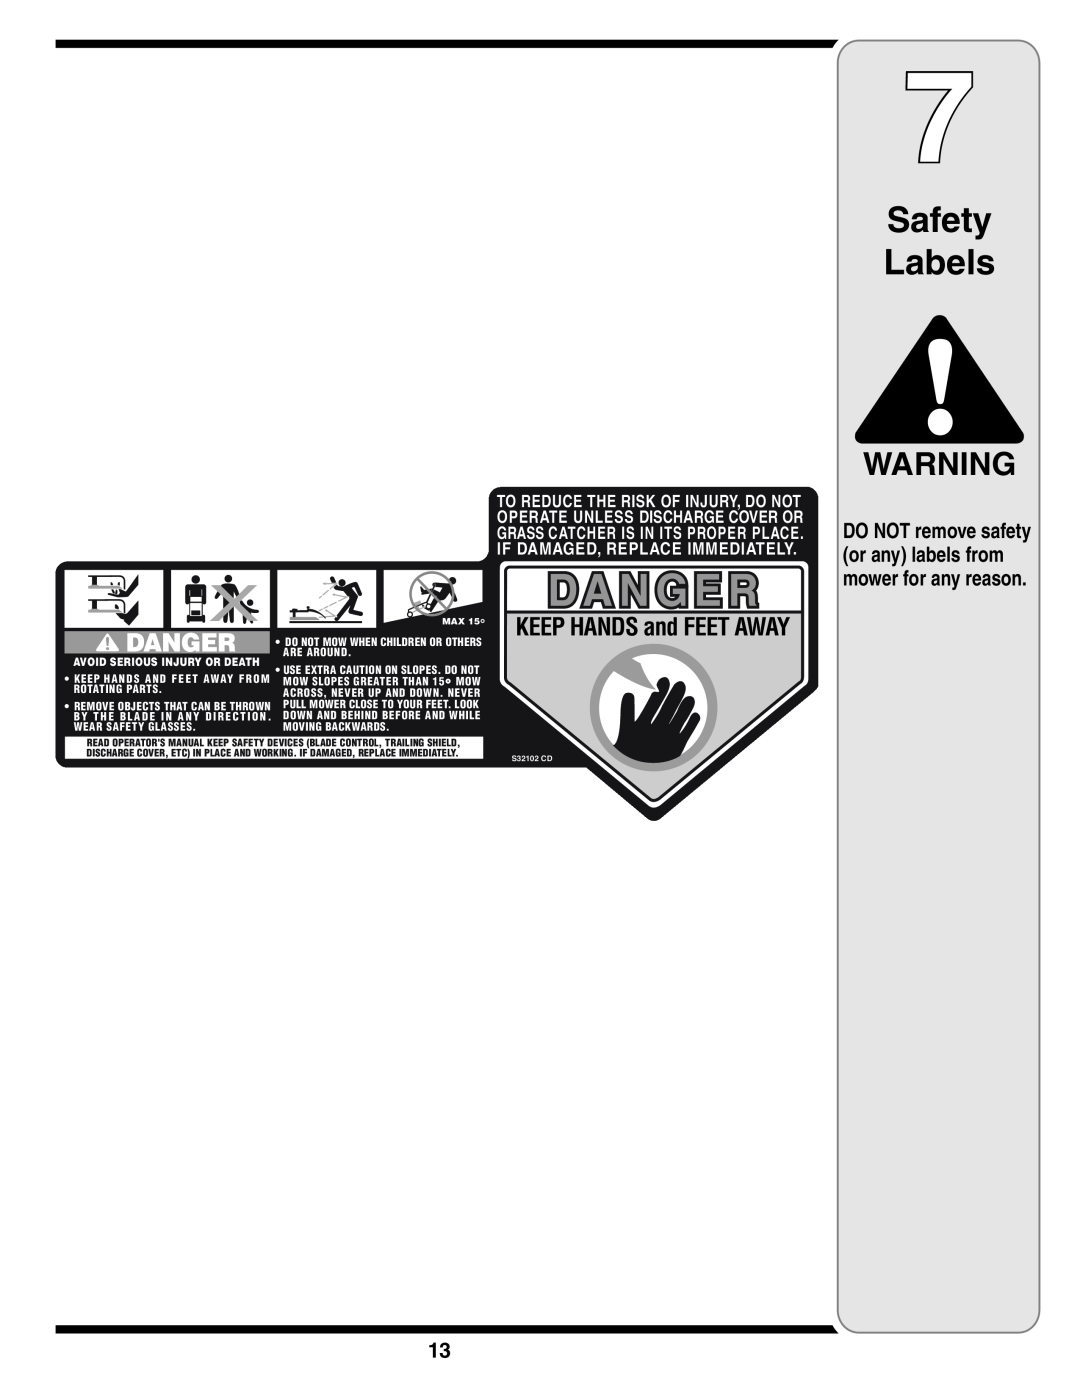 Cub Cadet 109 warranty Safety Labels, DO NOT remove safety or any labels from mower for any reason 